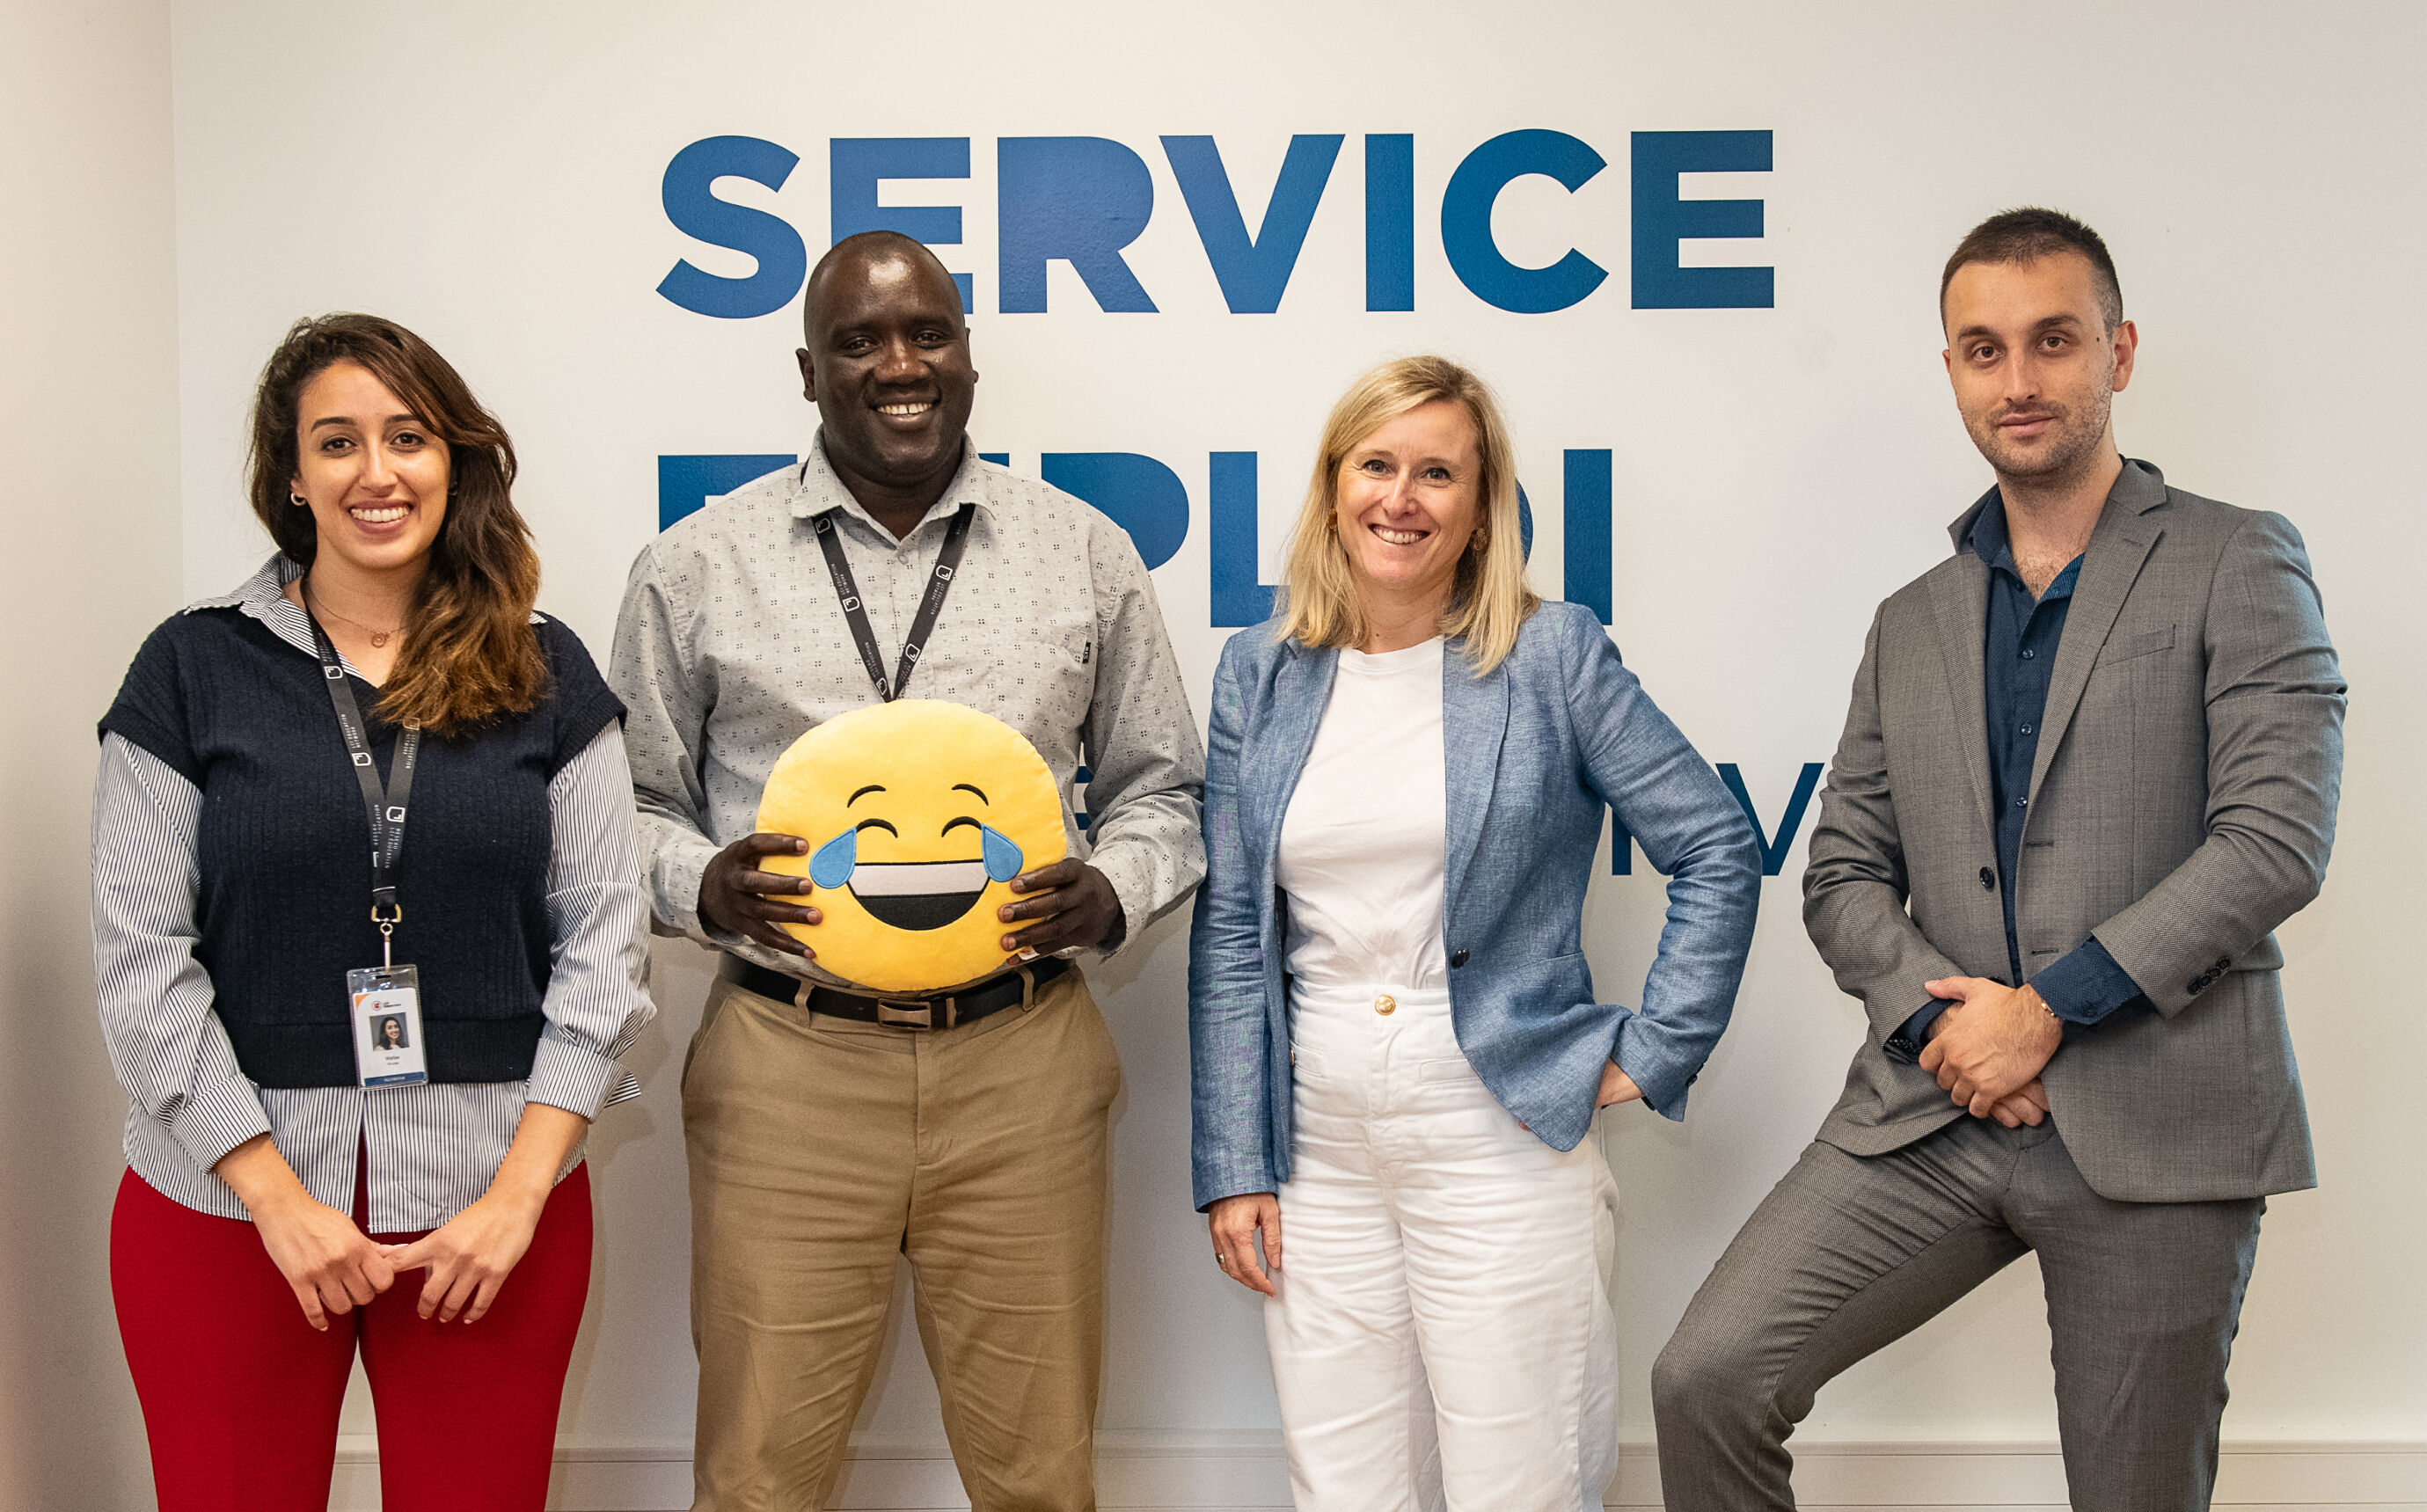 A diverse group of colleagues poses with a laughing emoji cushion, showcasing a positive work environment.